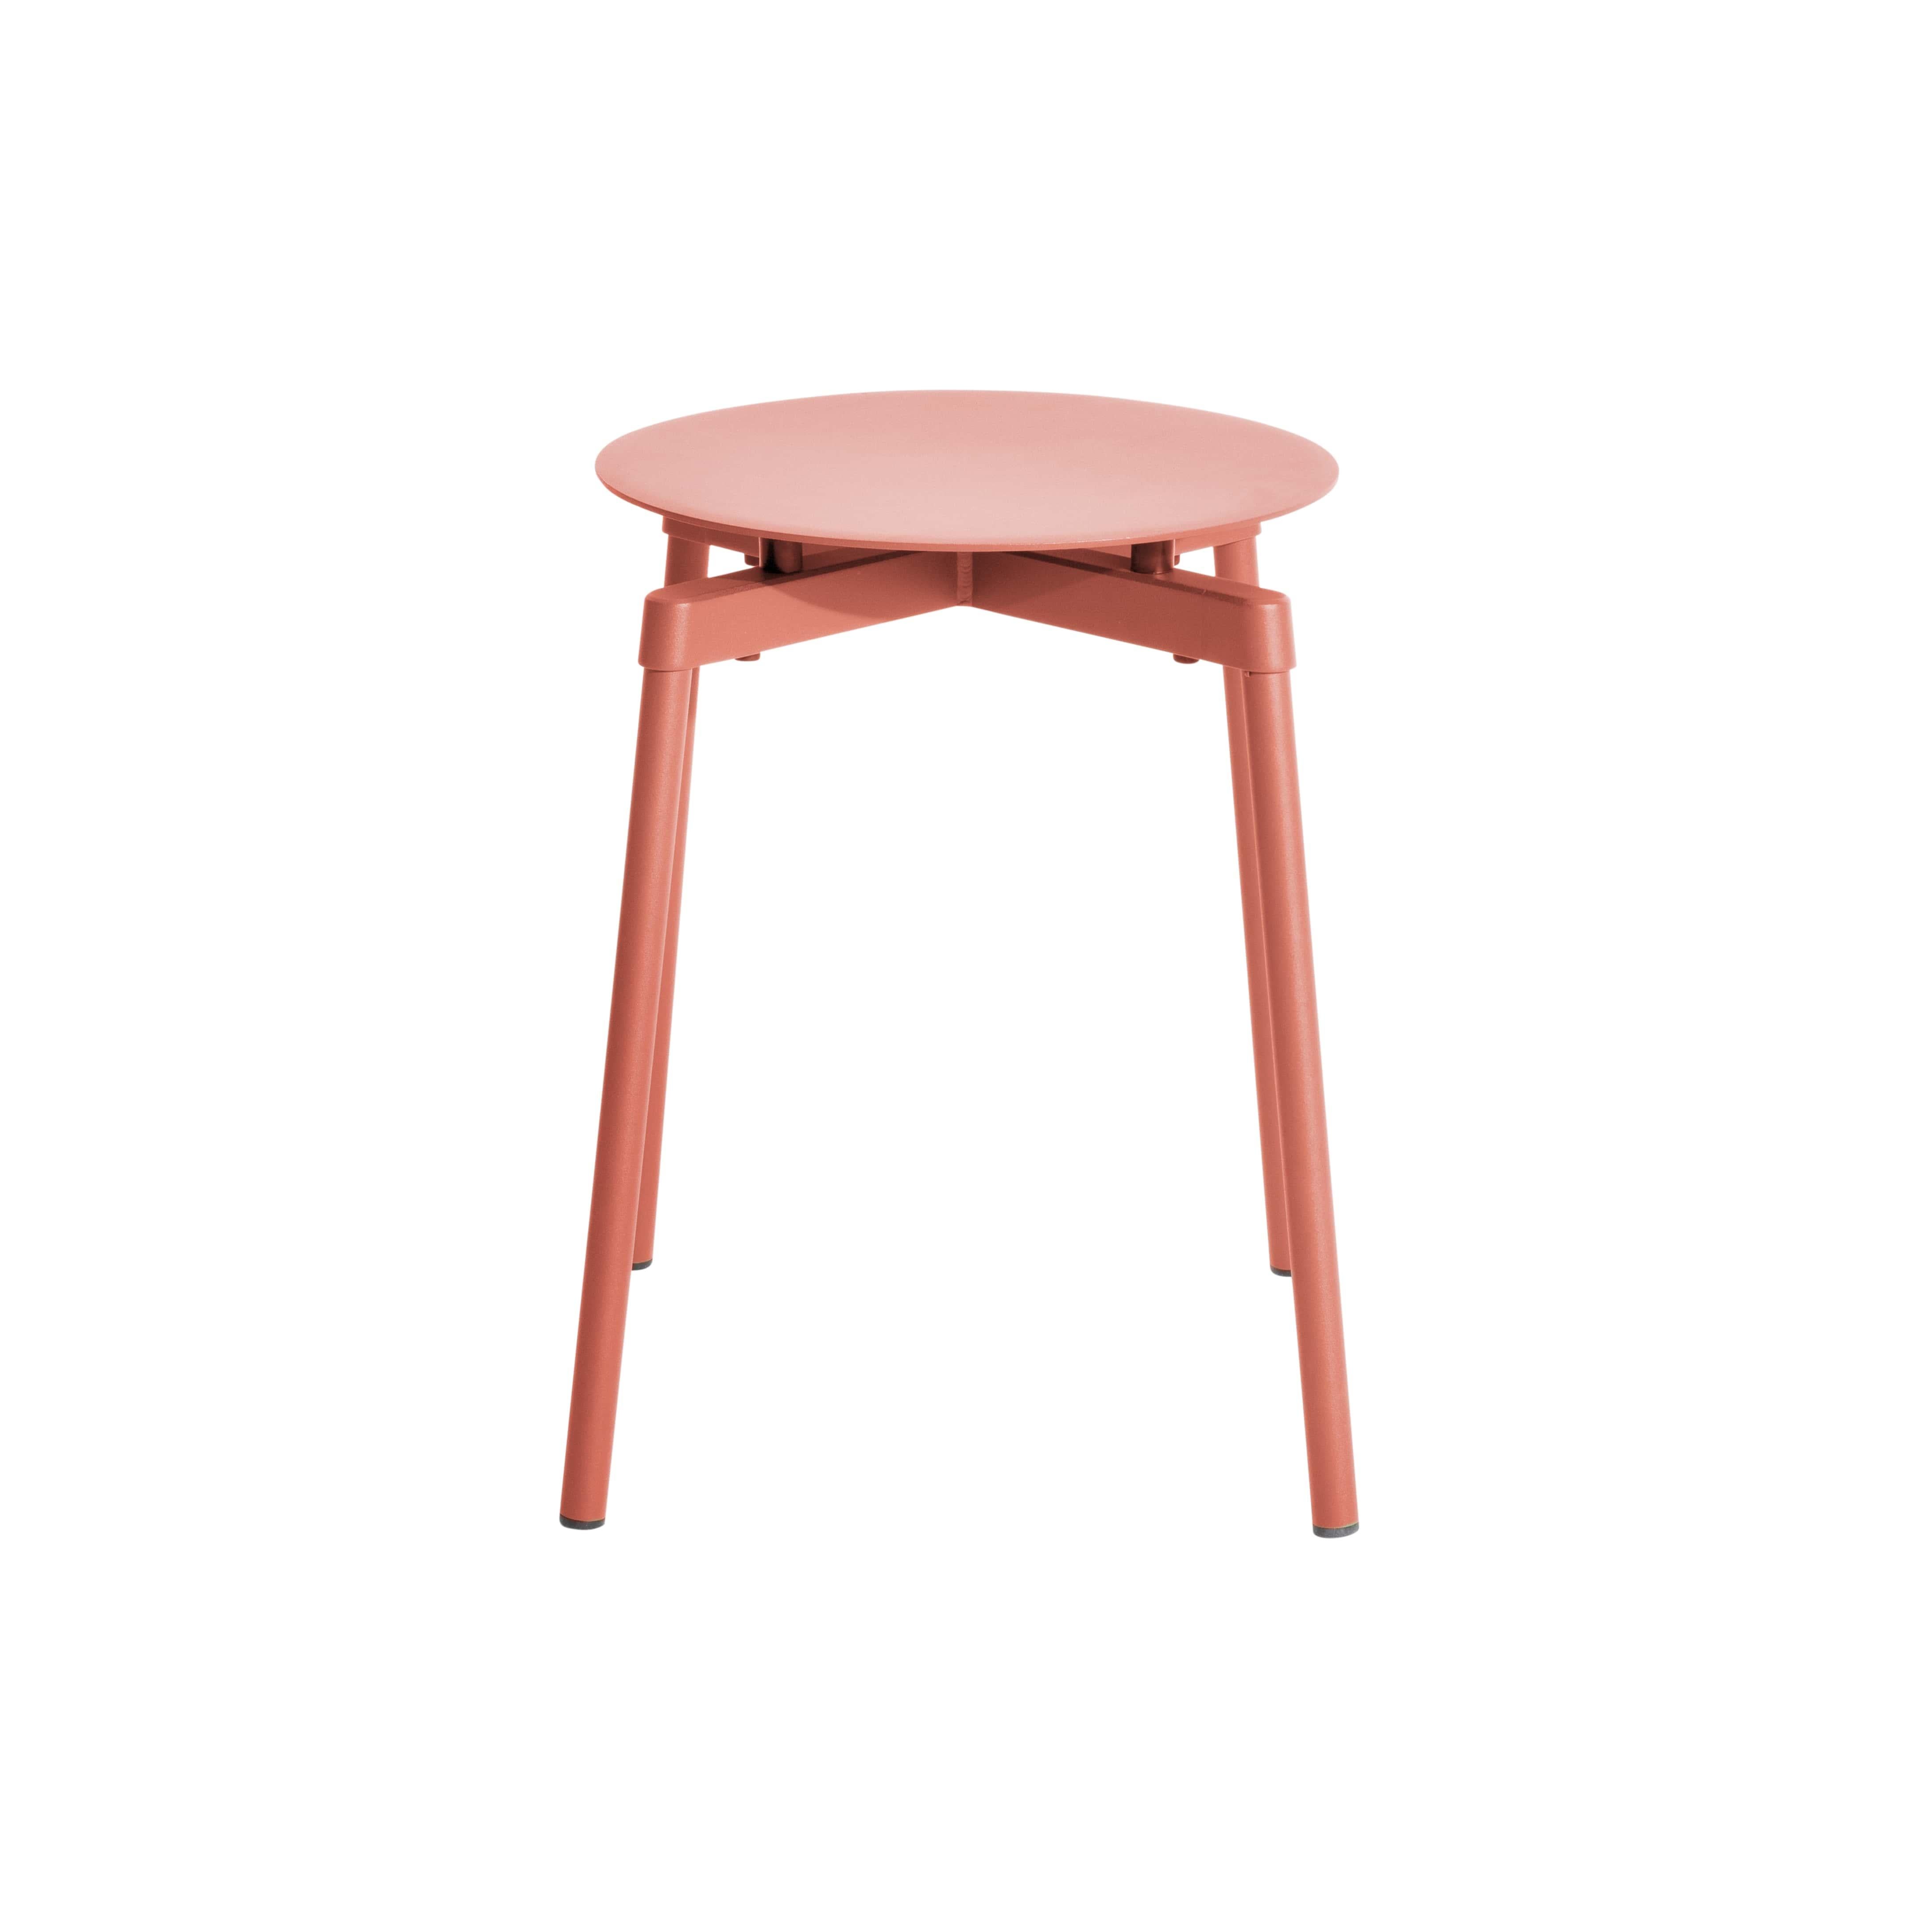 Petite Friture Fromme Stool in Coral Aluminium by Tom Chung, 2020

The Fromme collection stands out by its pure line and compact design. Absorbers placed under the seating gives a soft and very comfortable flexibility to seats. Made from